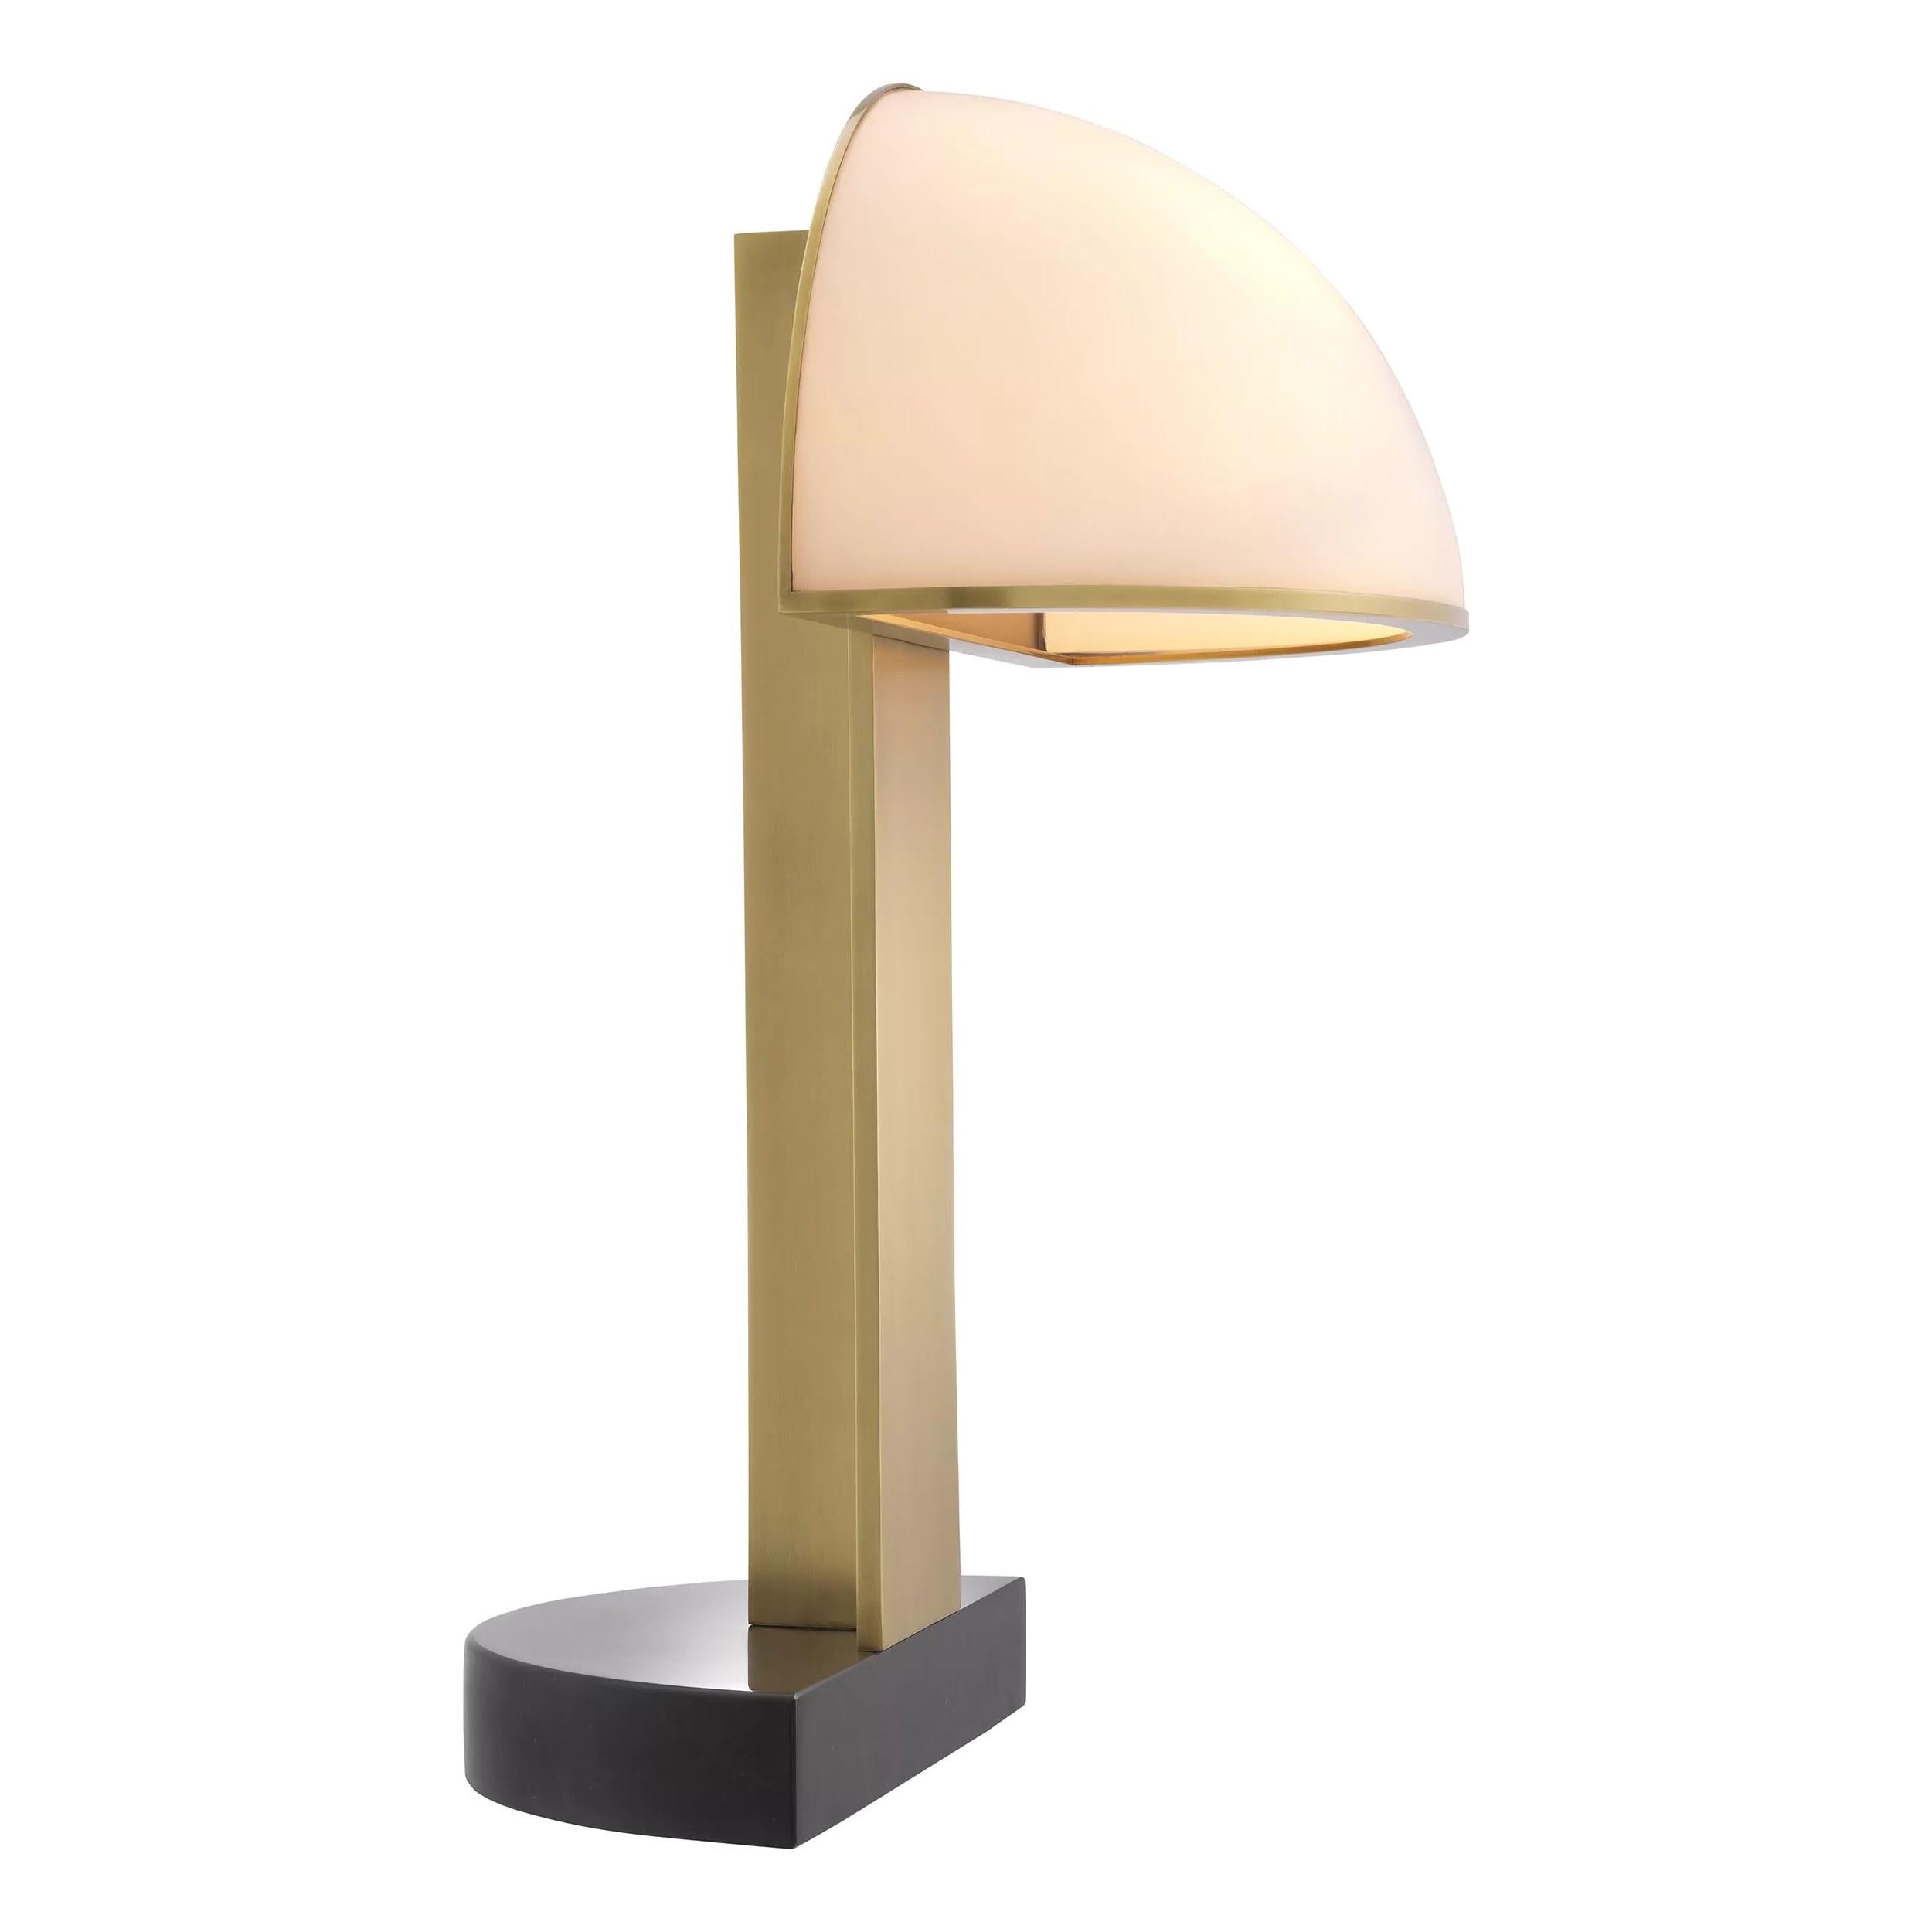 1920s design and Art Deco style brass and white opaline glass with black marble table lamp composed of a brass finishes metal structure adorned with a black marble base and a handmade white opaline mushroom shaped shade. 1 E27 light bulb required.